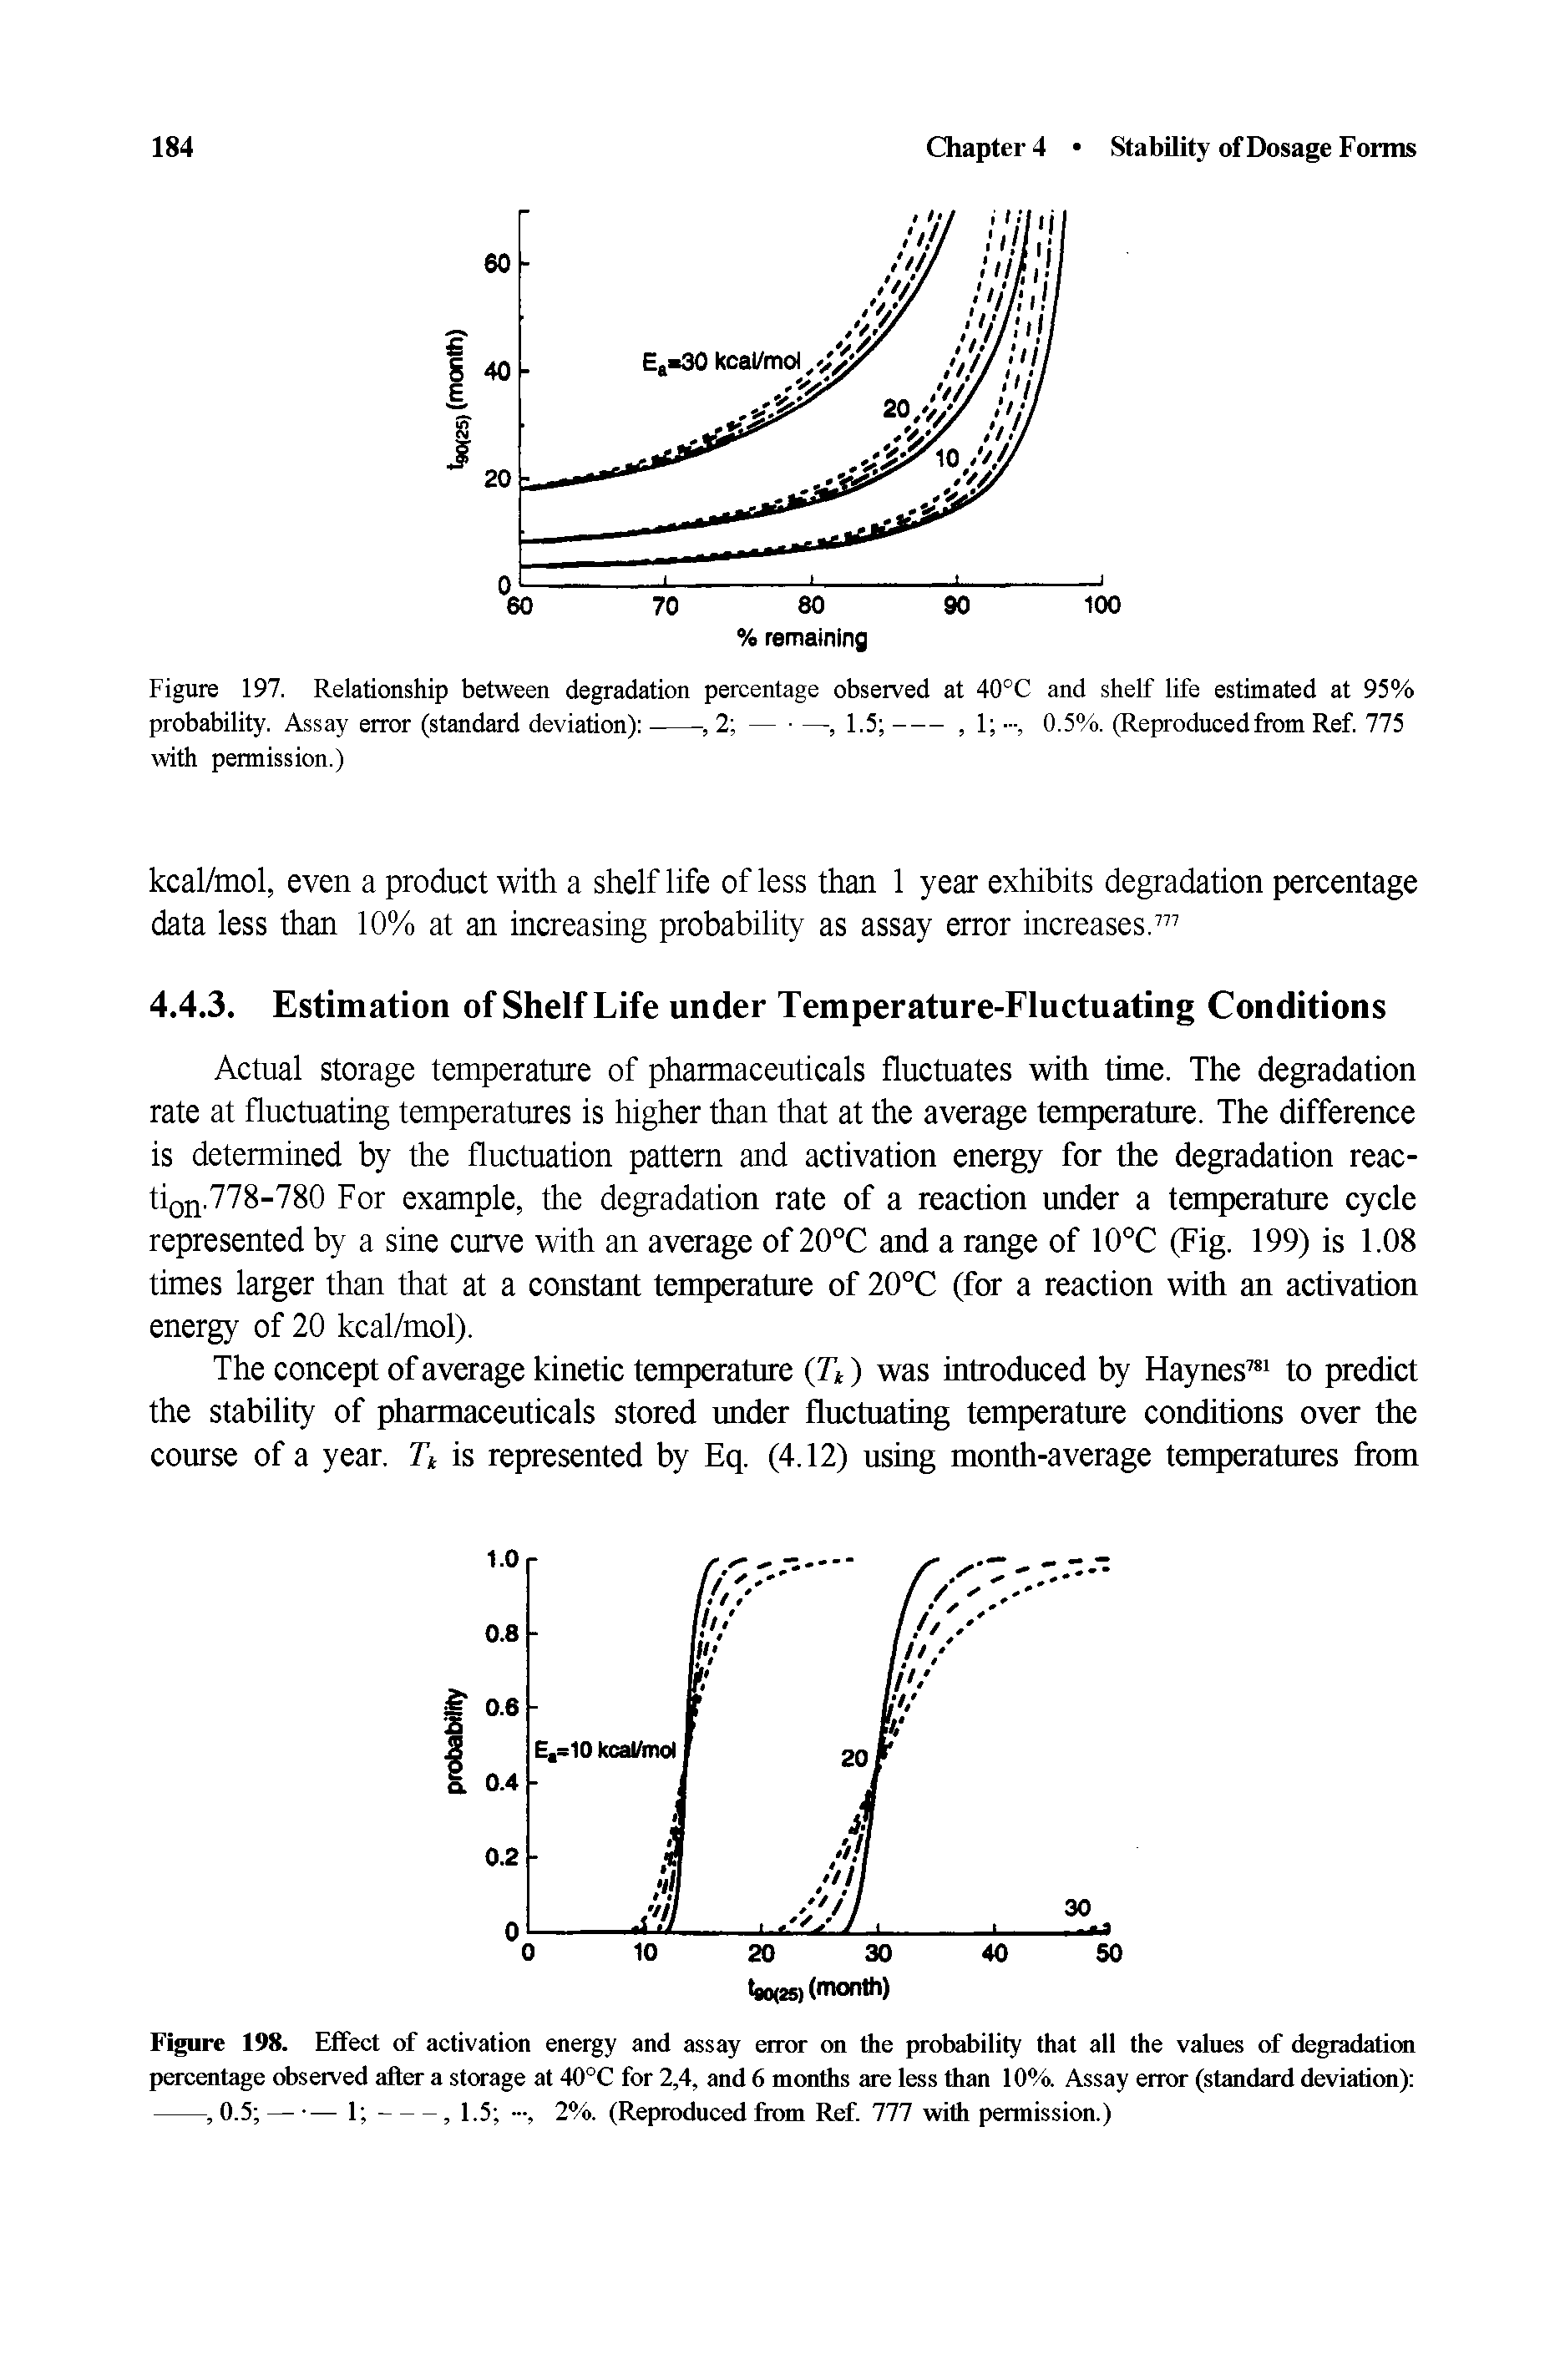 Figure 198. Effect of activation energy and assay error on the probability that all the values of degradation percentage observed after a storage at 40°C for 2,4, and 6 months are less than 10%. Assay error (standard deviation) -----, 0.5 — — 1 -------, 1.5 , 2%. (Reproduced from Ref. Ill with permission.)...